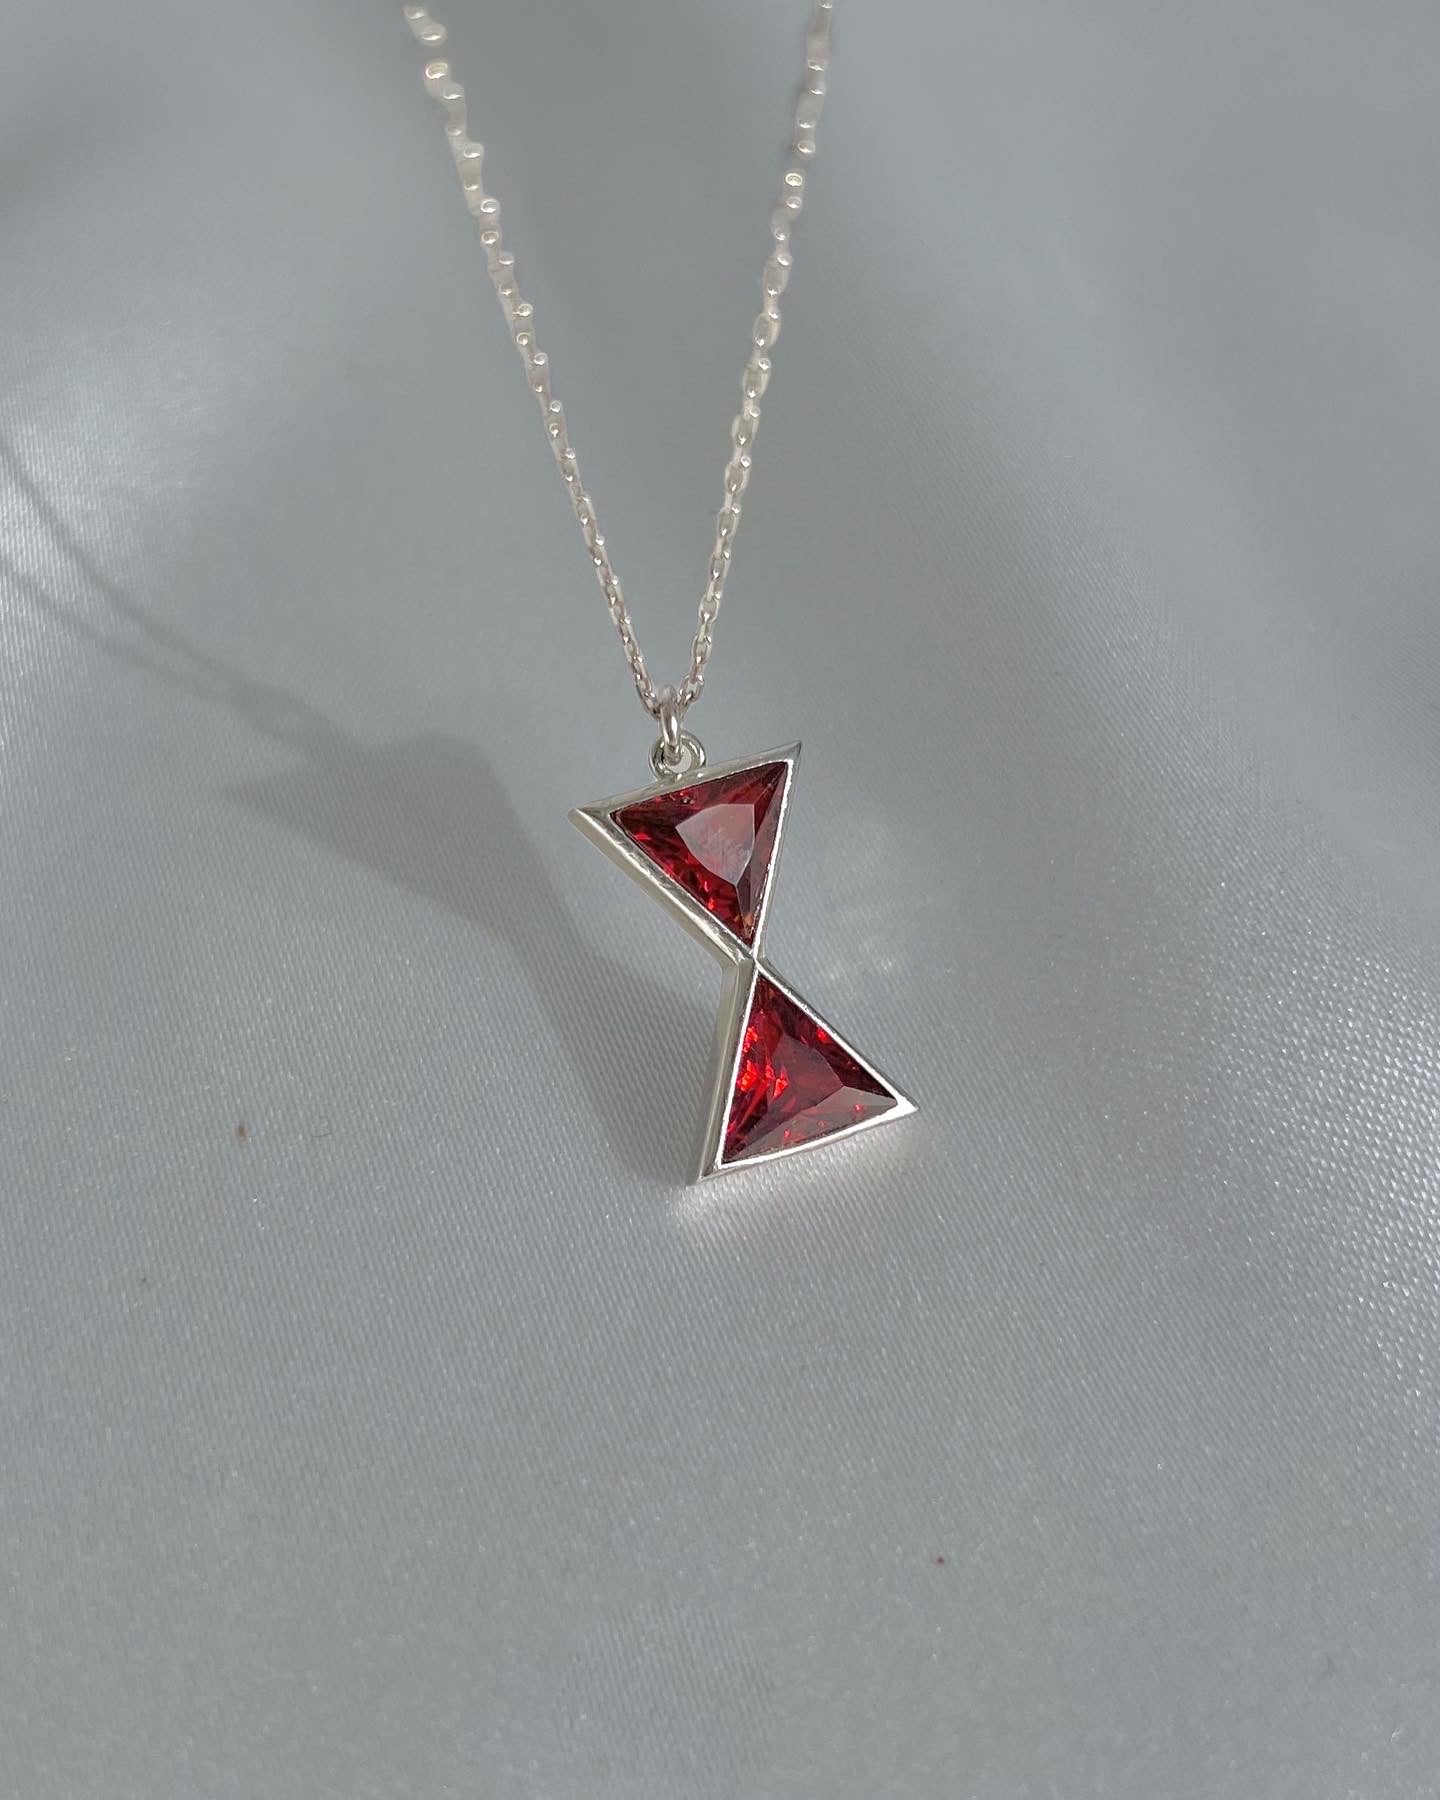 Black Widow Inspired Necklace-Natasha Romanoff Hourglass Version 1 Necklace-925K Sterling Silver Necklace